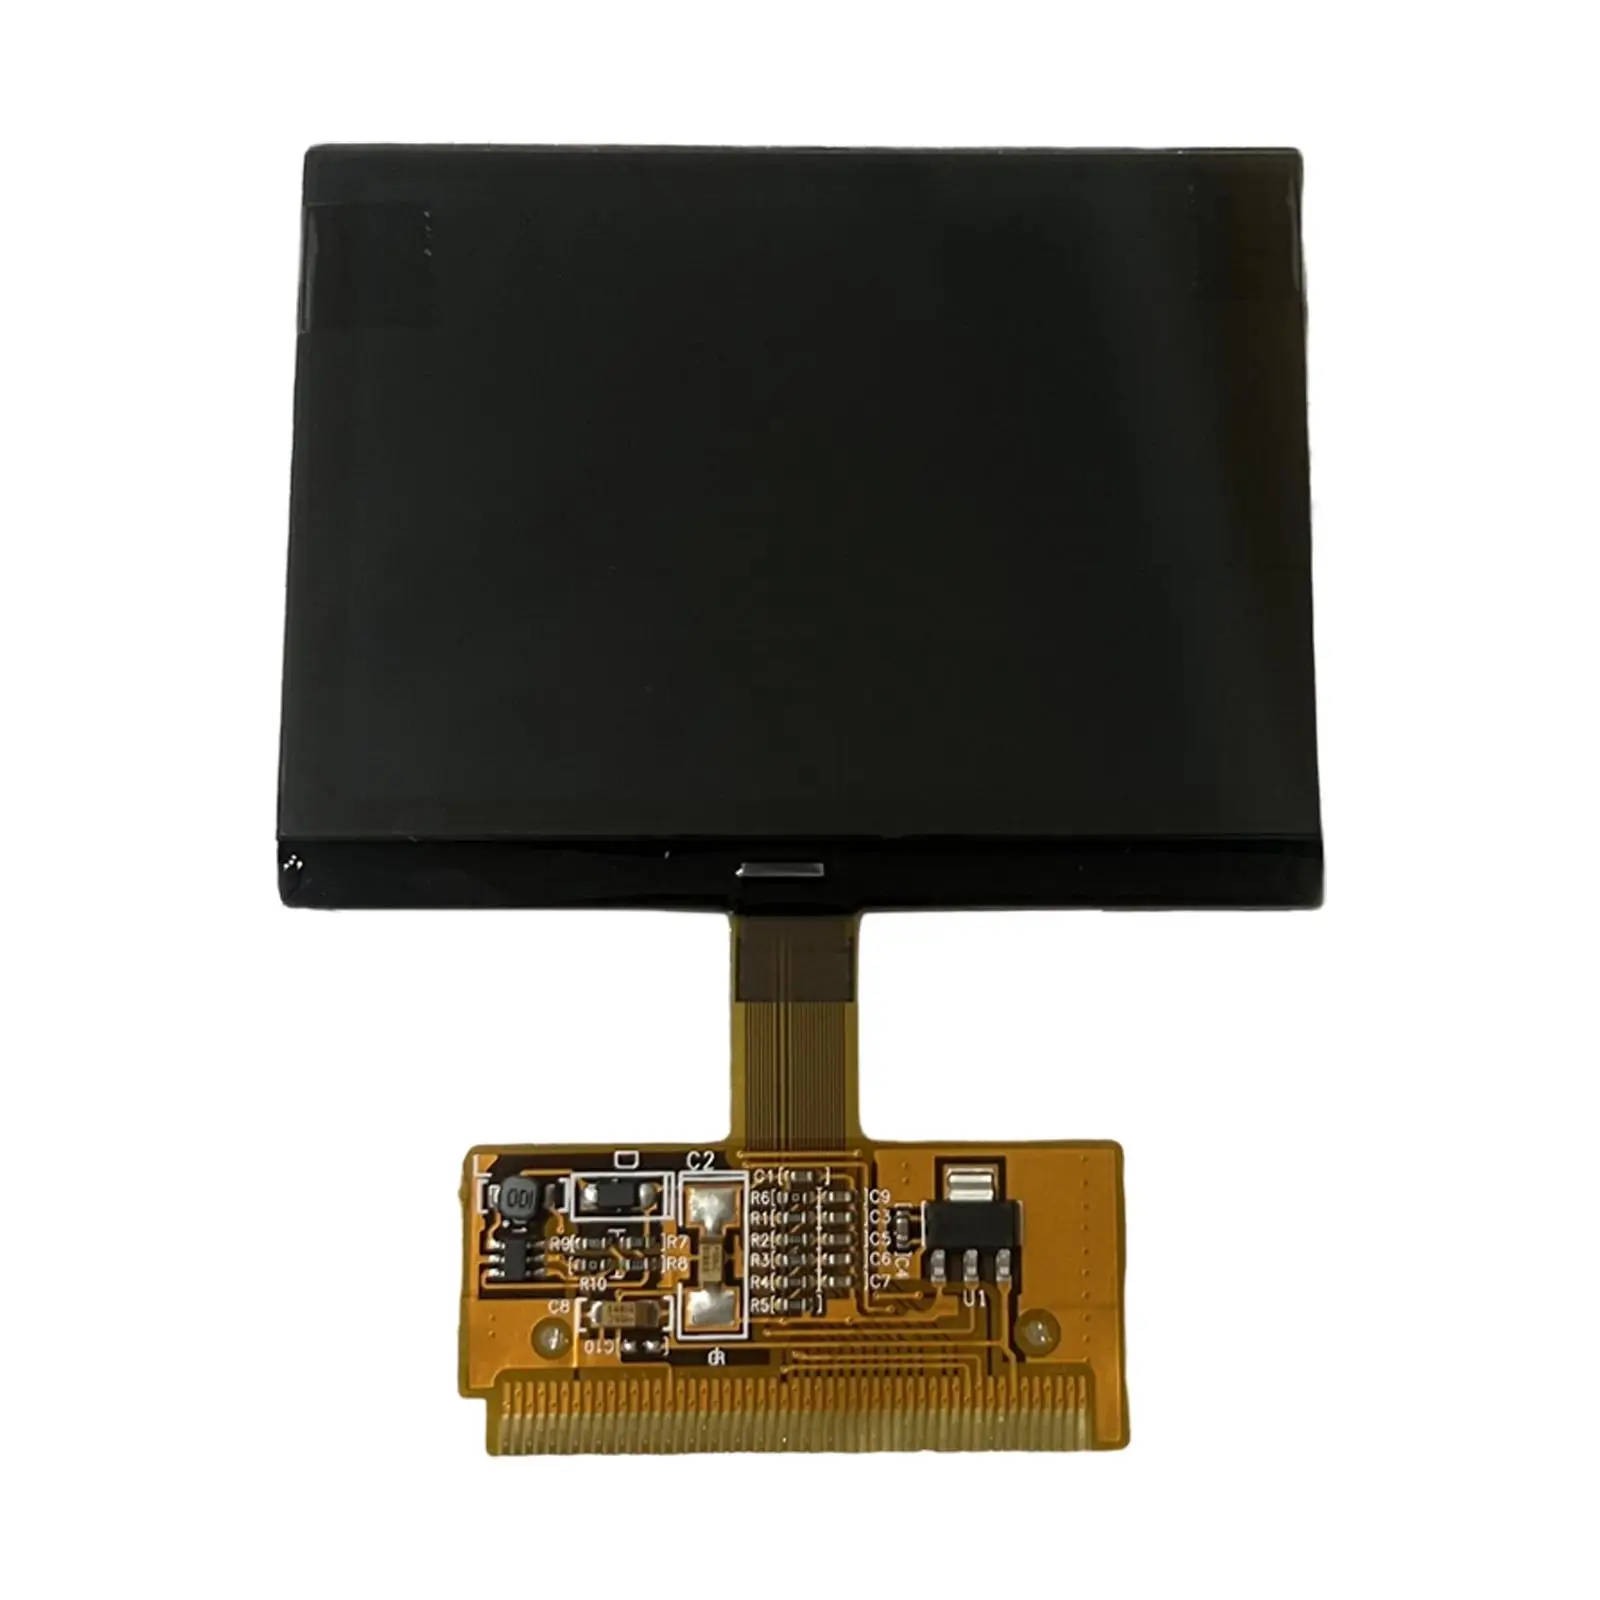 LCD Display Replacement Automotive Accessories for A3 A4 Vdo